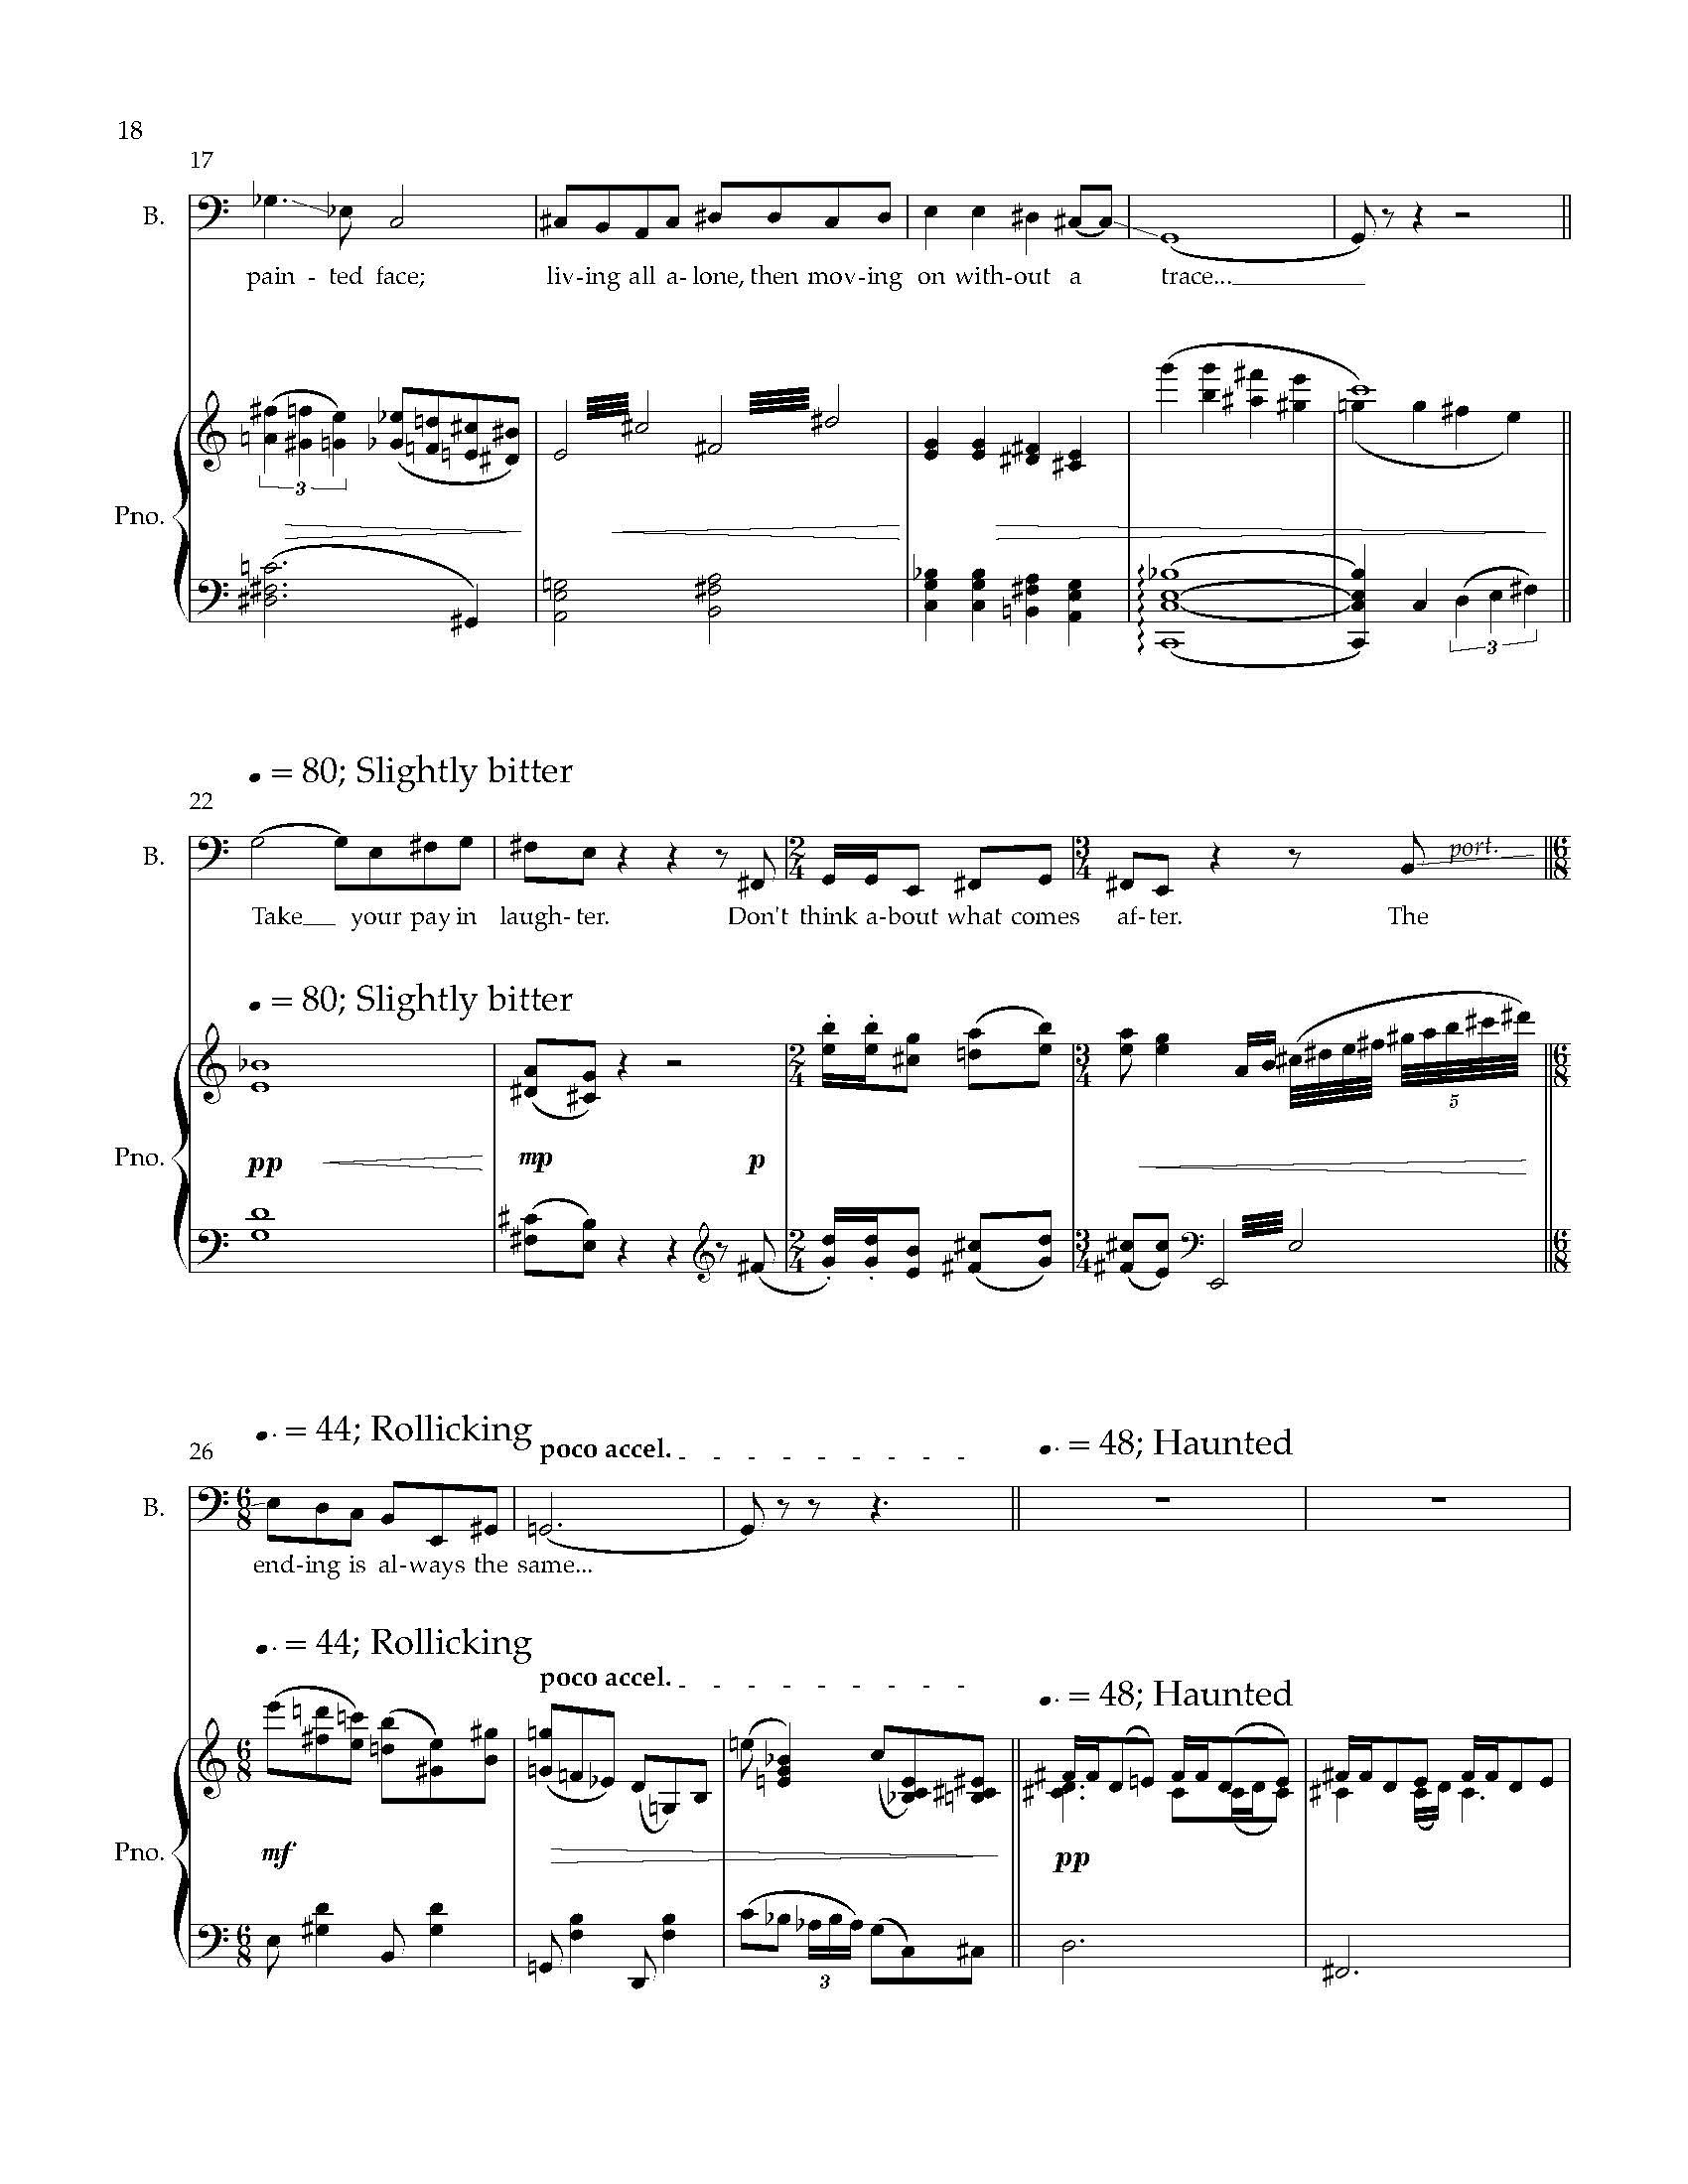 Five Arias from HWGS - Complete Score (1)_Page_22.jpg